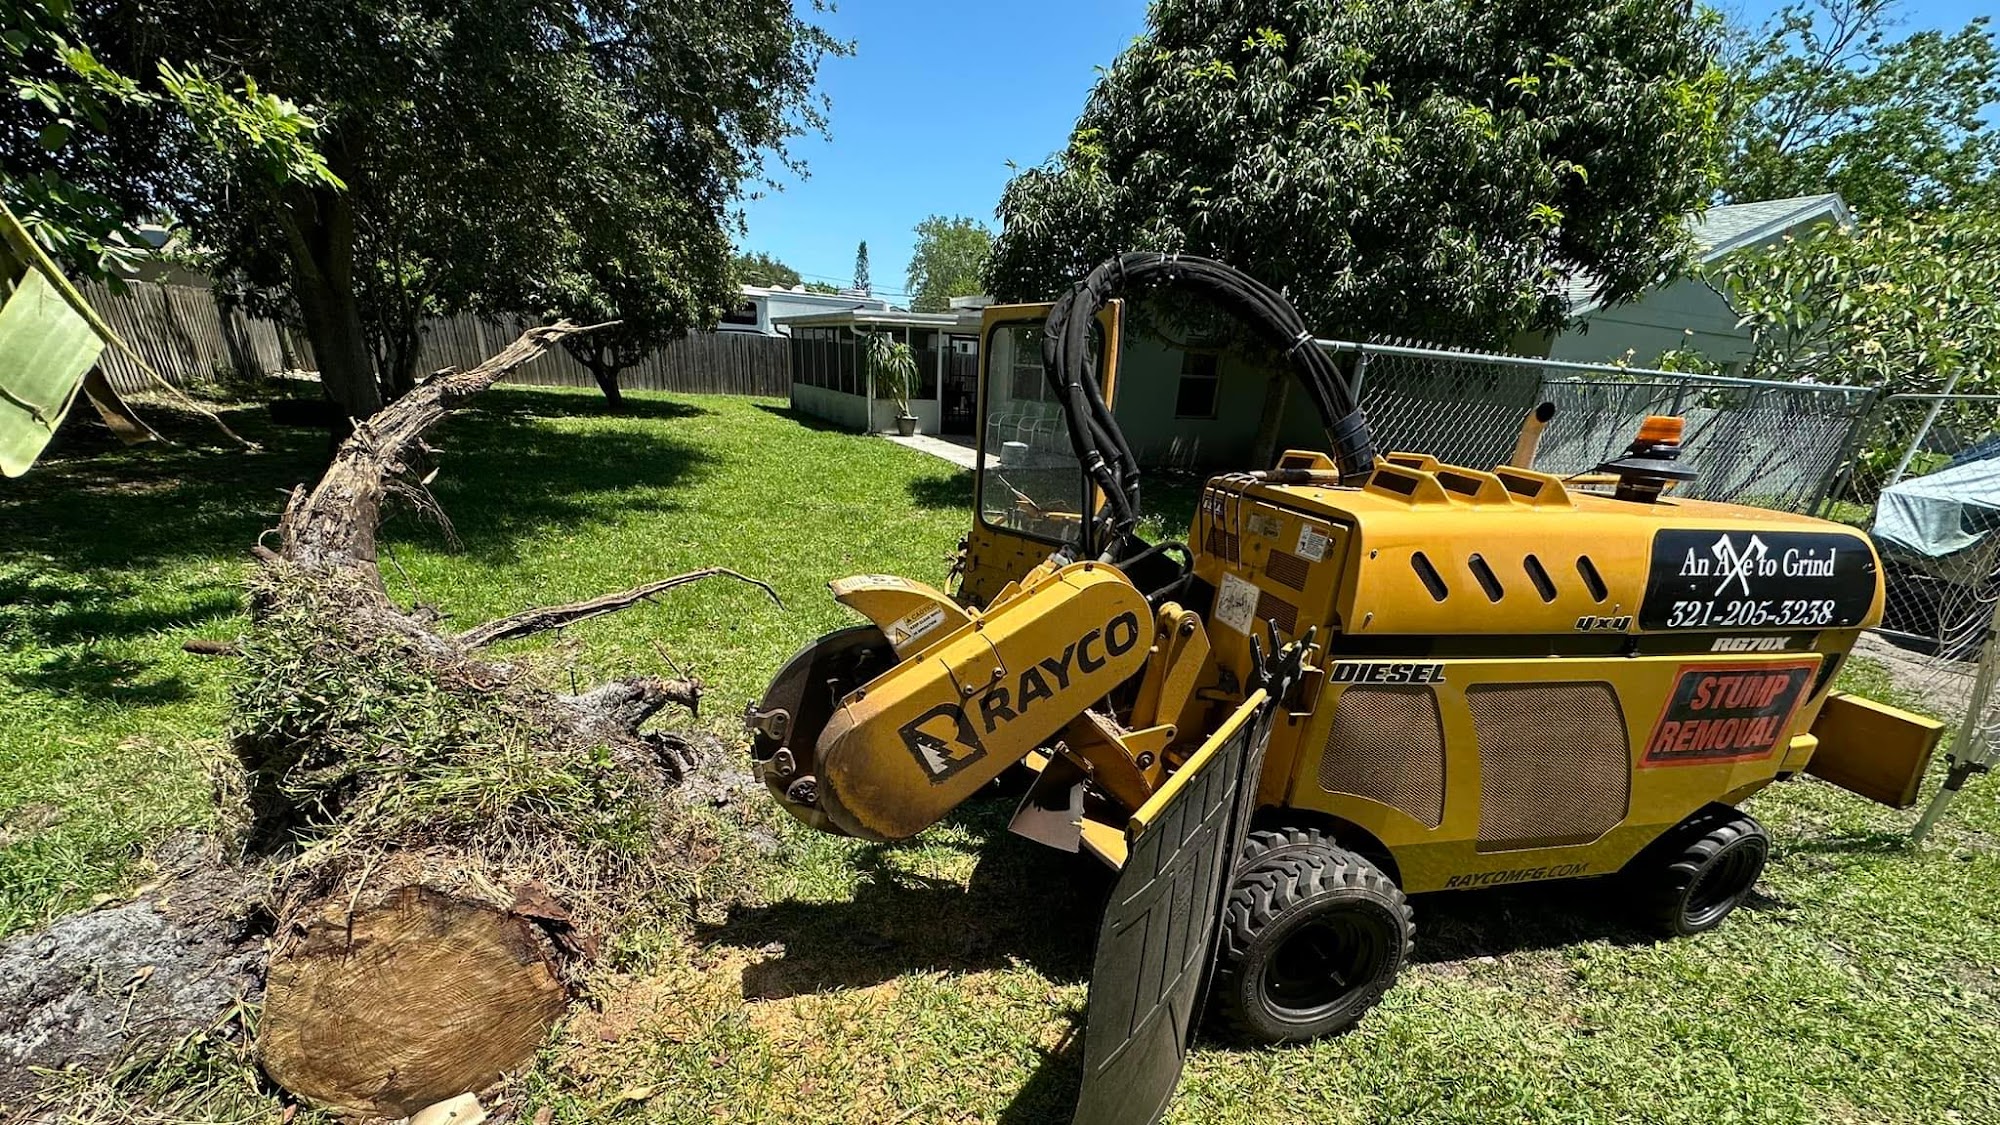 Axe To Grind Stump Removal Melbourne Beach Florida 